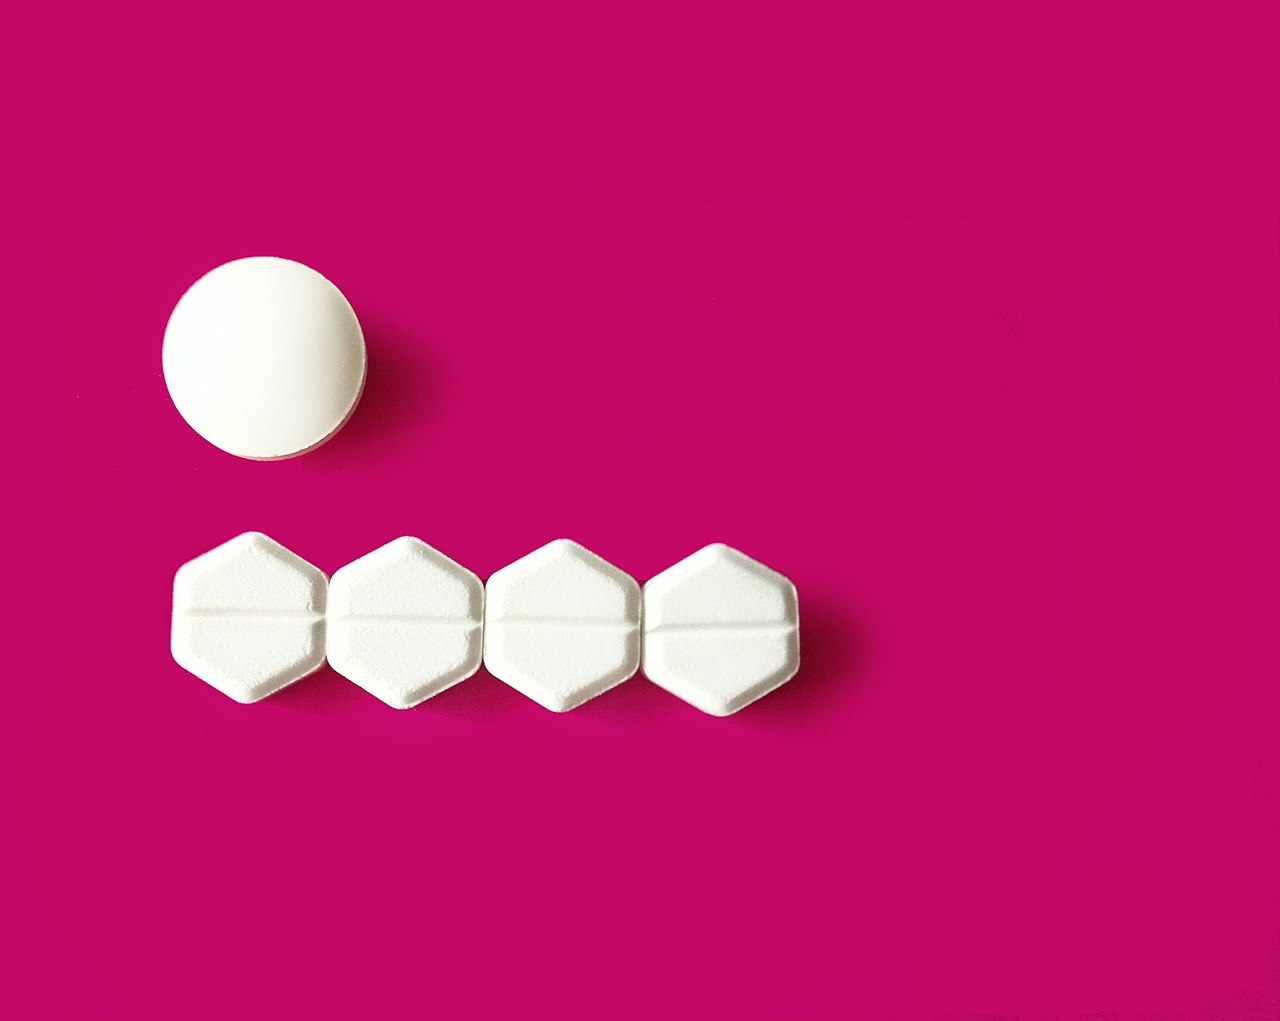 Everything You Need To Know About The Case Freezing The FDA’s Abortion Pill Approval